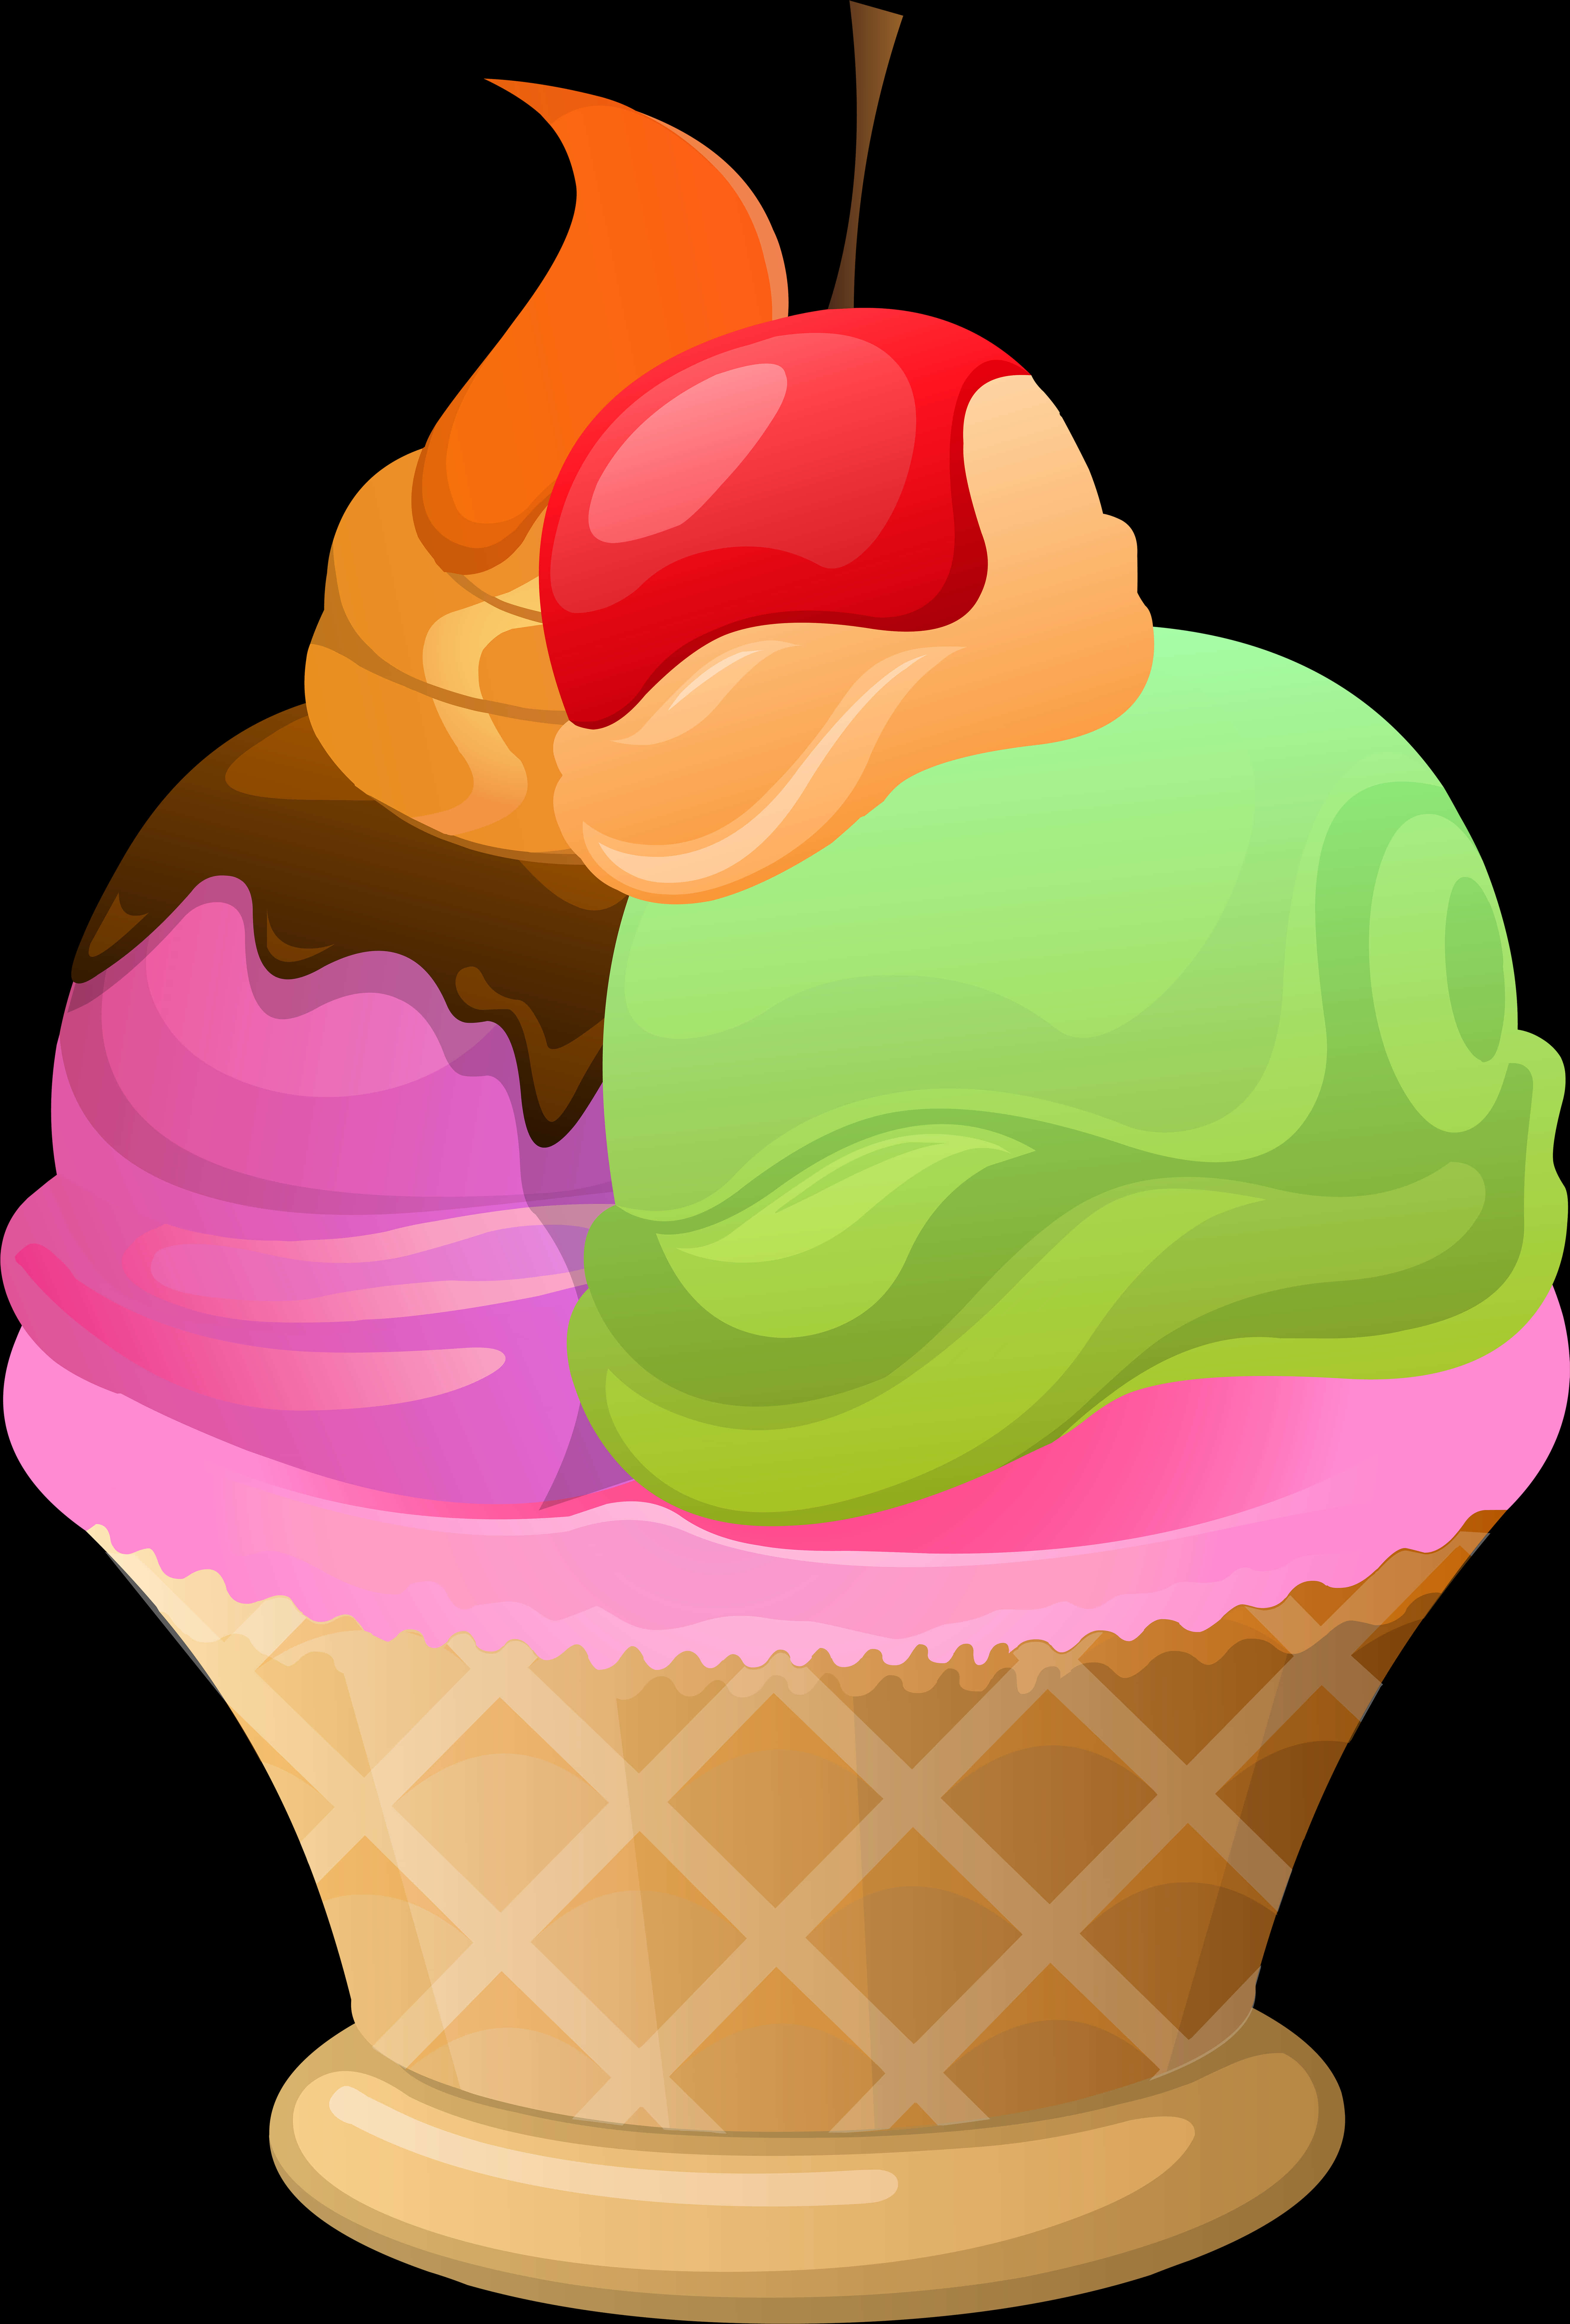 Colorful Ice Cream Cone Clipart PNG image